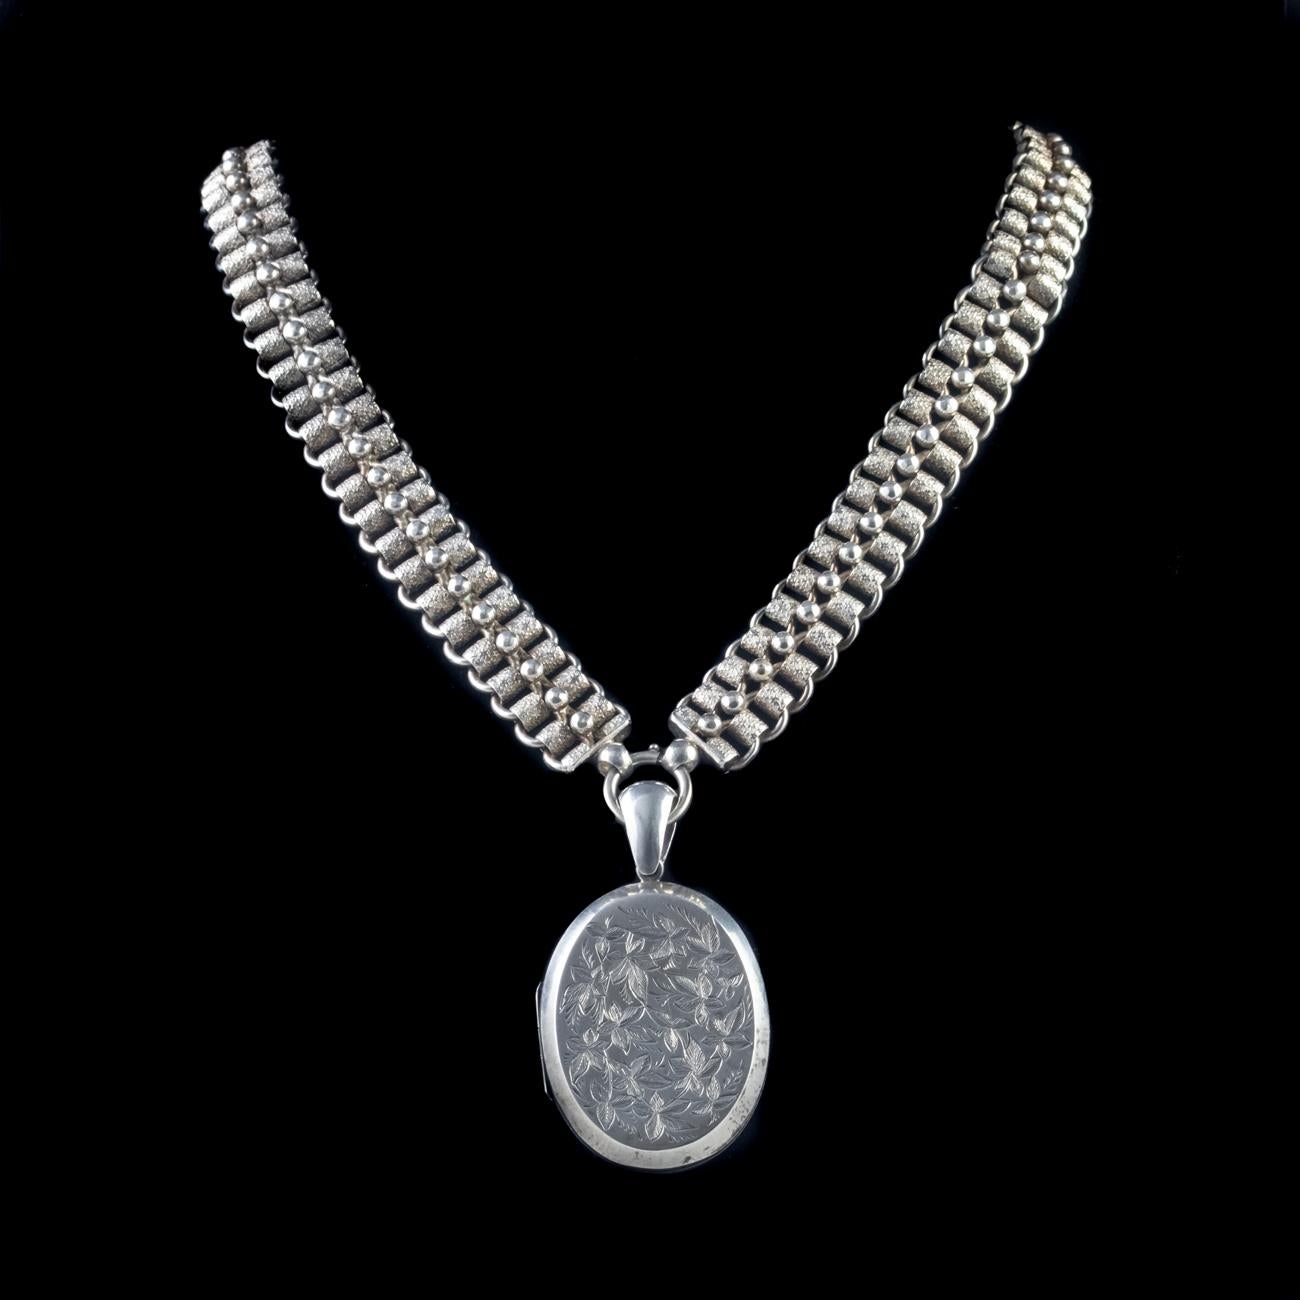 Women's or Men's Antique Victorian Collar and Locket Sterling Silver Dated 1882 For Sale